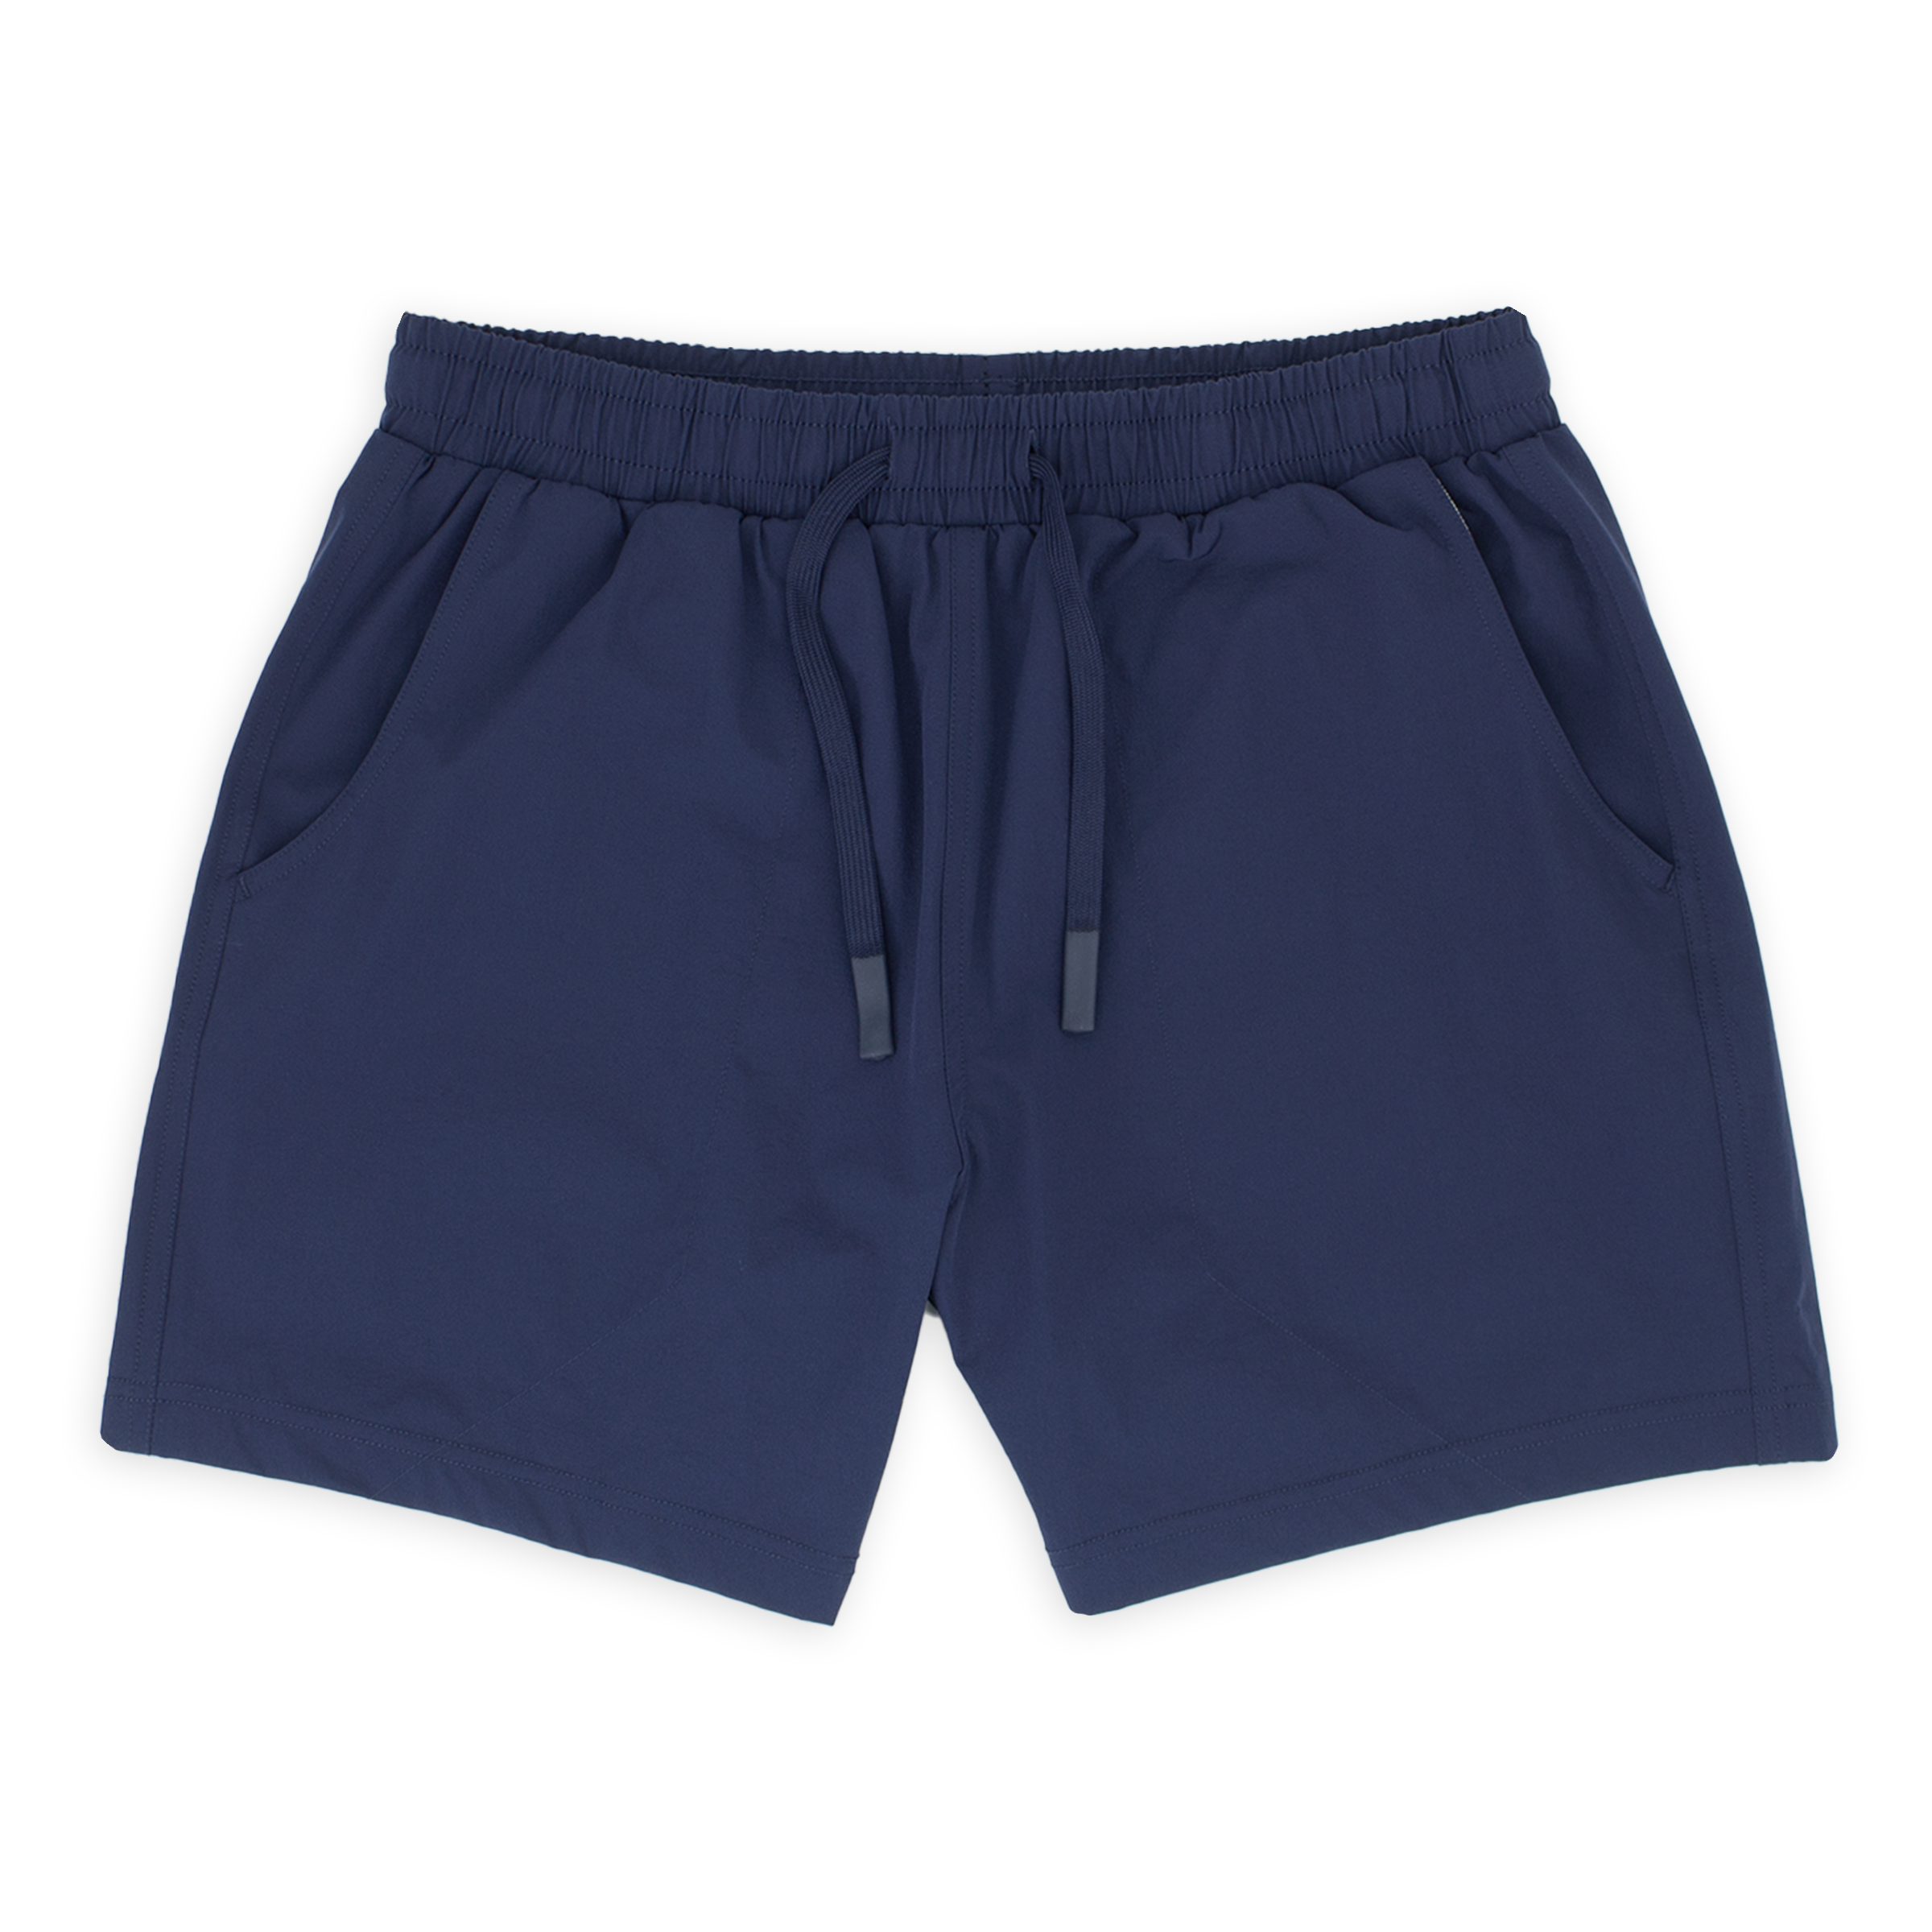 Base Short 5.5" Navy front with elastic waistband, dyed-to-match flat drawstring with rubberized tips, and two seam pockets